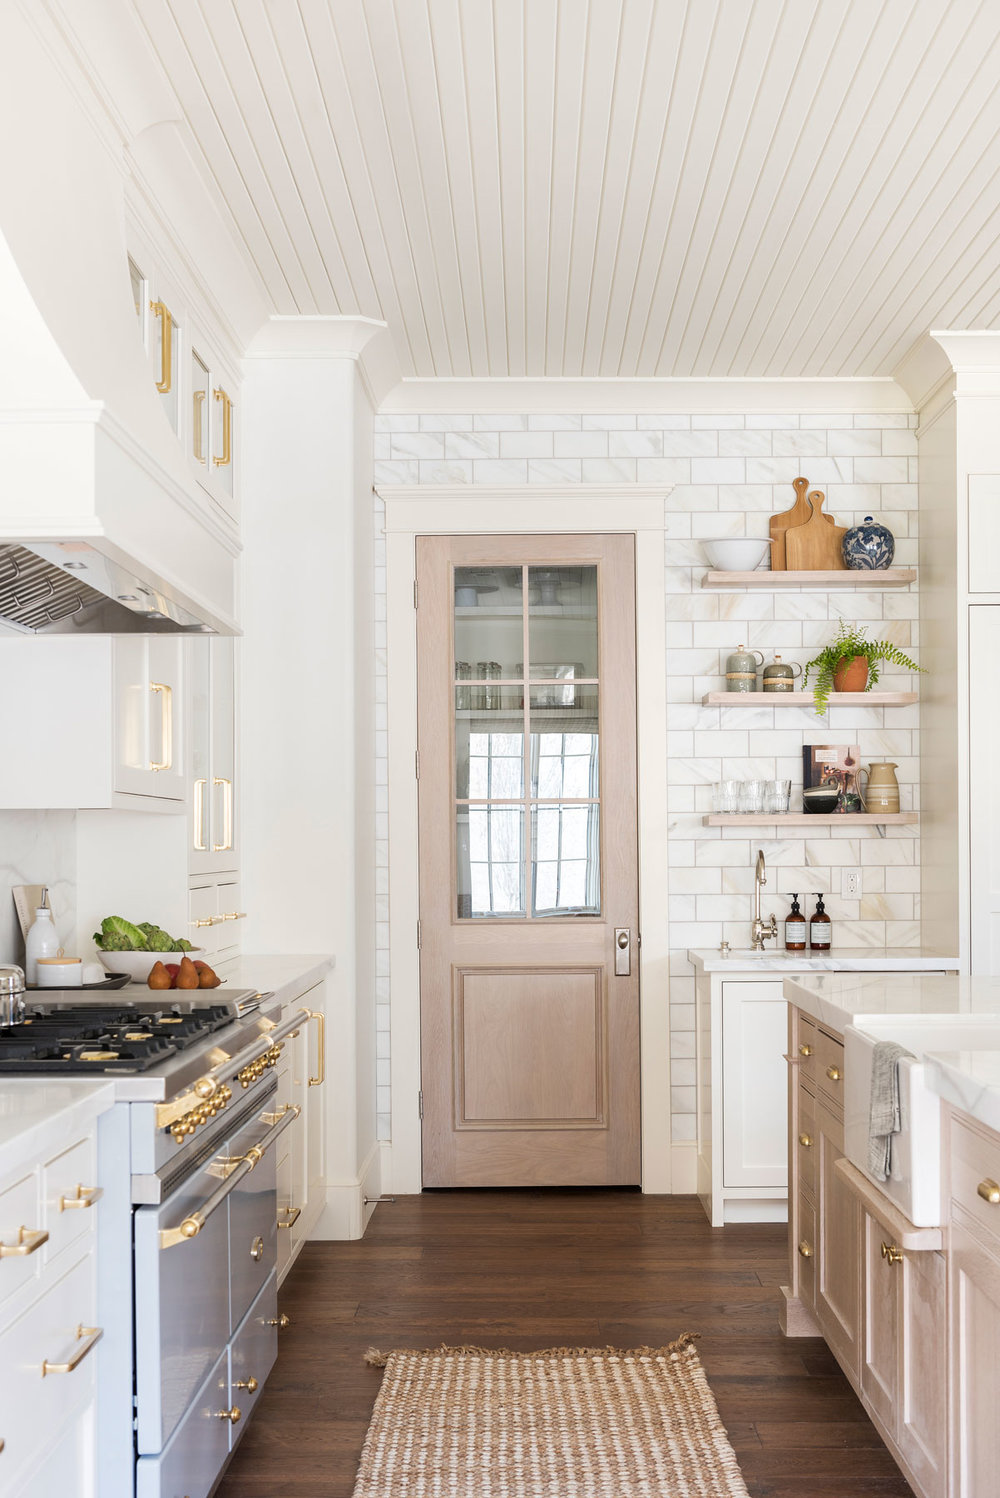 Studio McGee kitchen - Lucy Call Photography - white kitchen - kitchen - kitchen design - kitchen decor